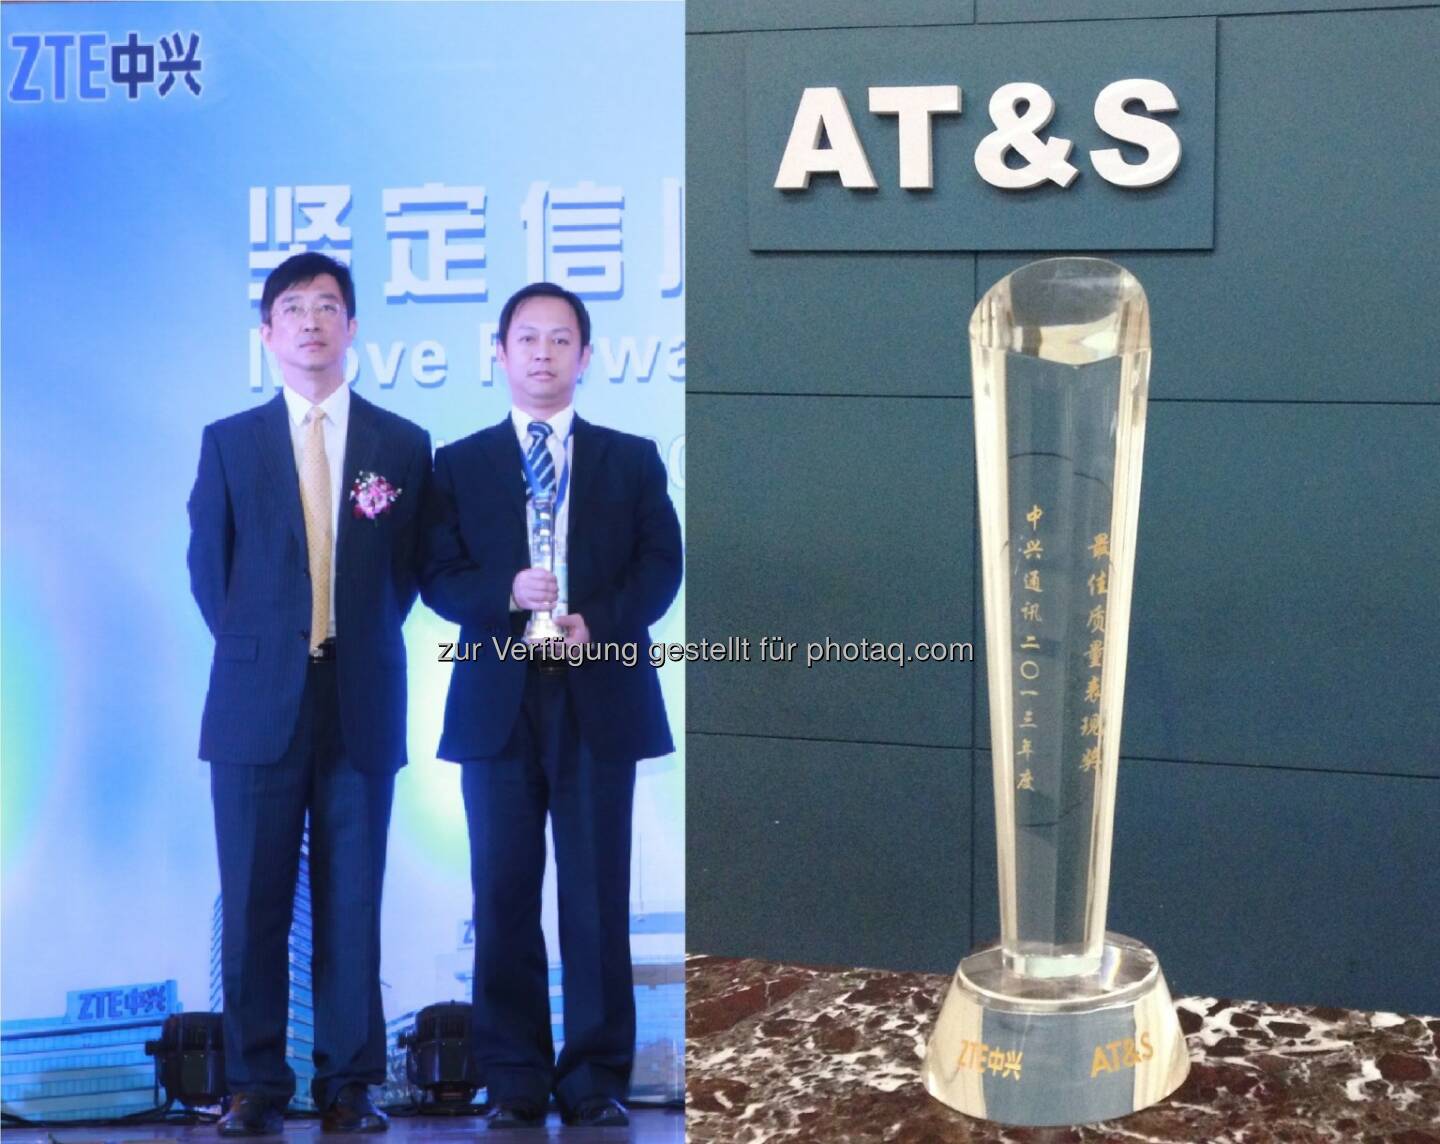 ZTE Best Quality Award 2013 geht an AT&S - ZTE Vice President Cao Lei, AT&S Sales Manager China Alex Zhang
Copyright: AT&S